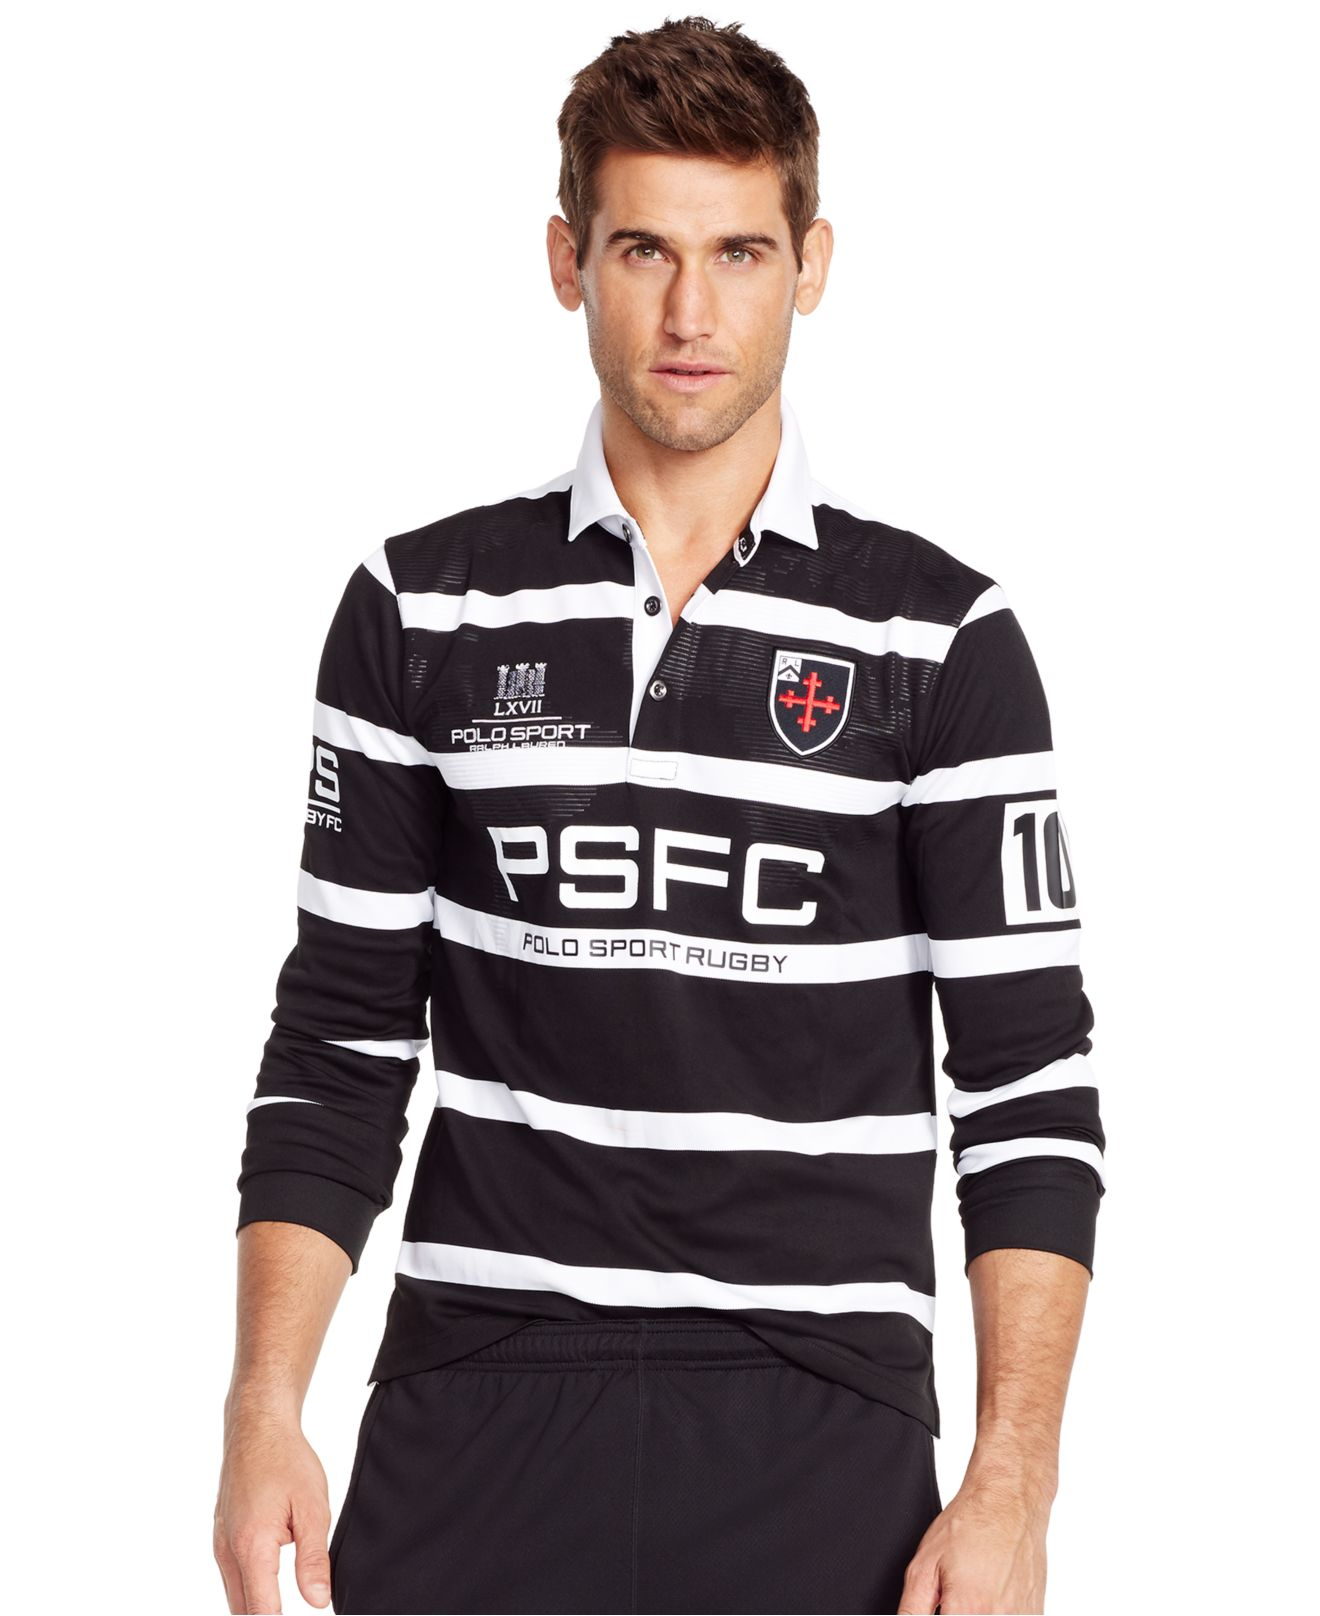 Collection of Ralph Lauren Mens Rugby Shirts - Best ...